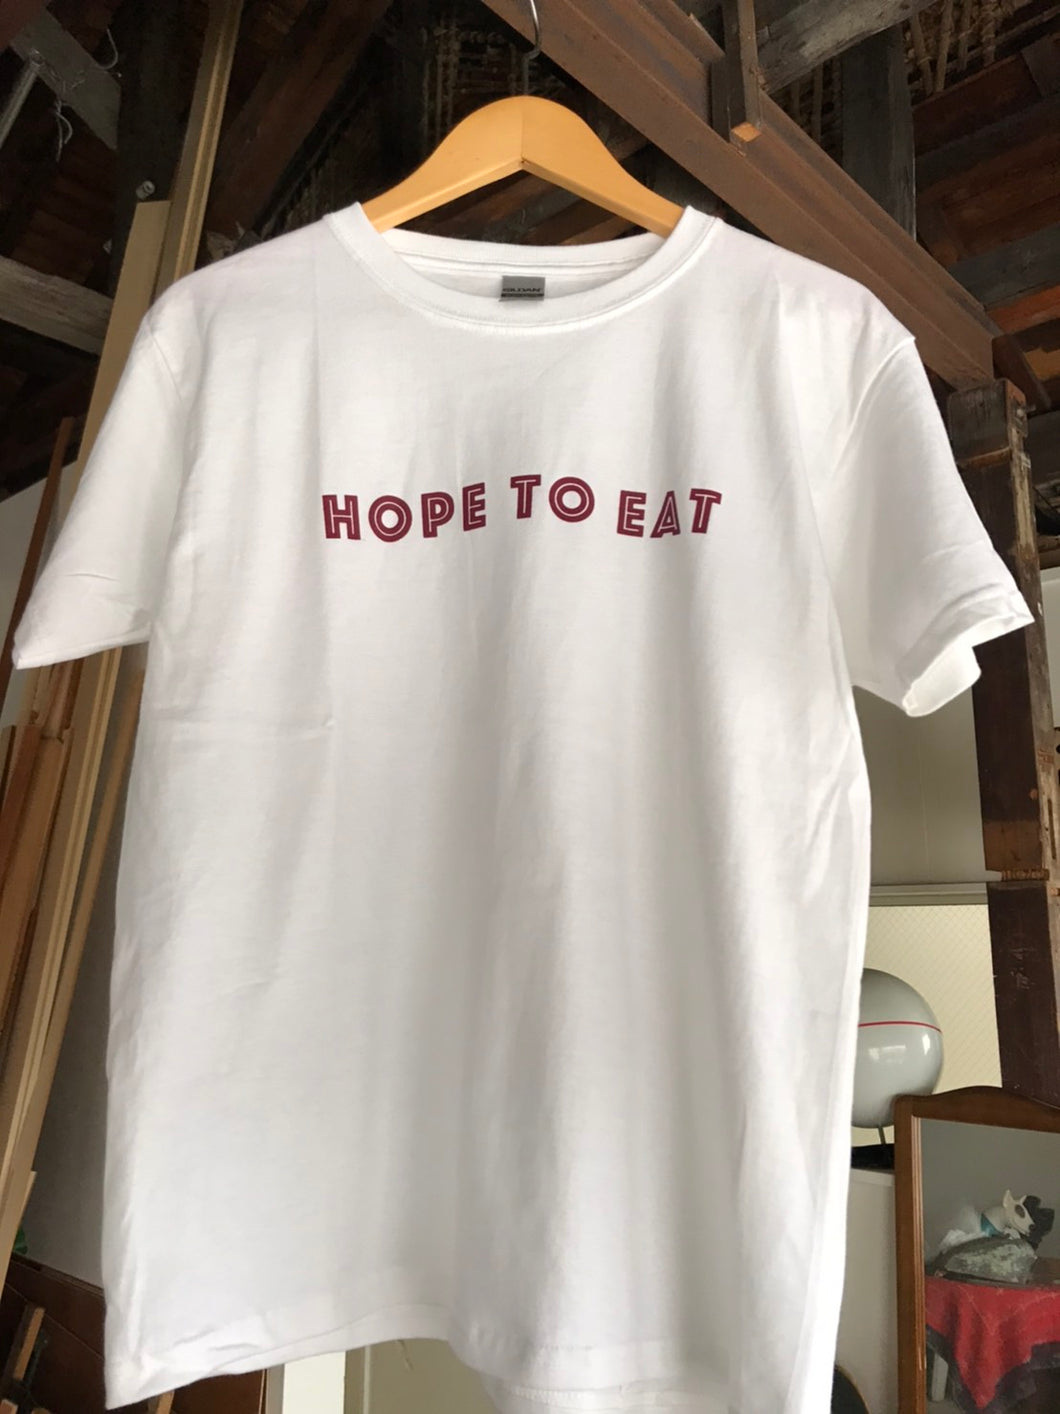 「HOPE TO EAT」プリントTシャツ